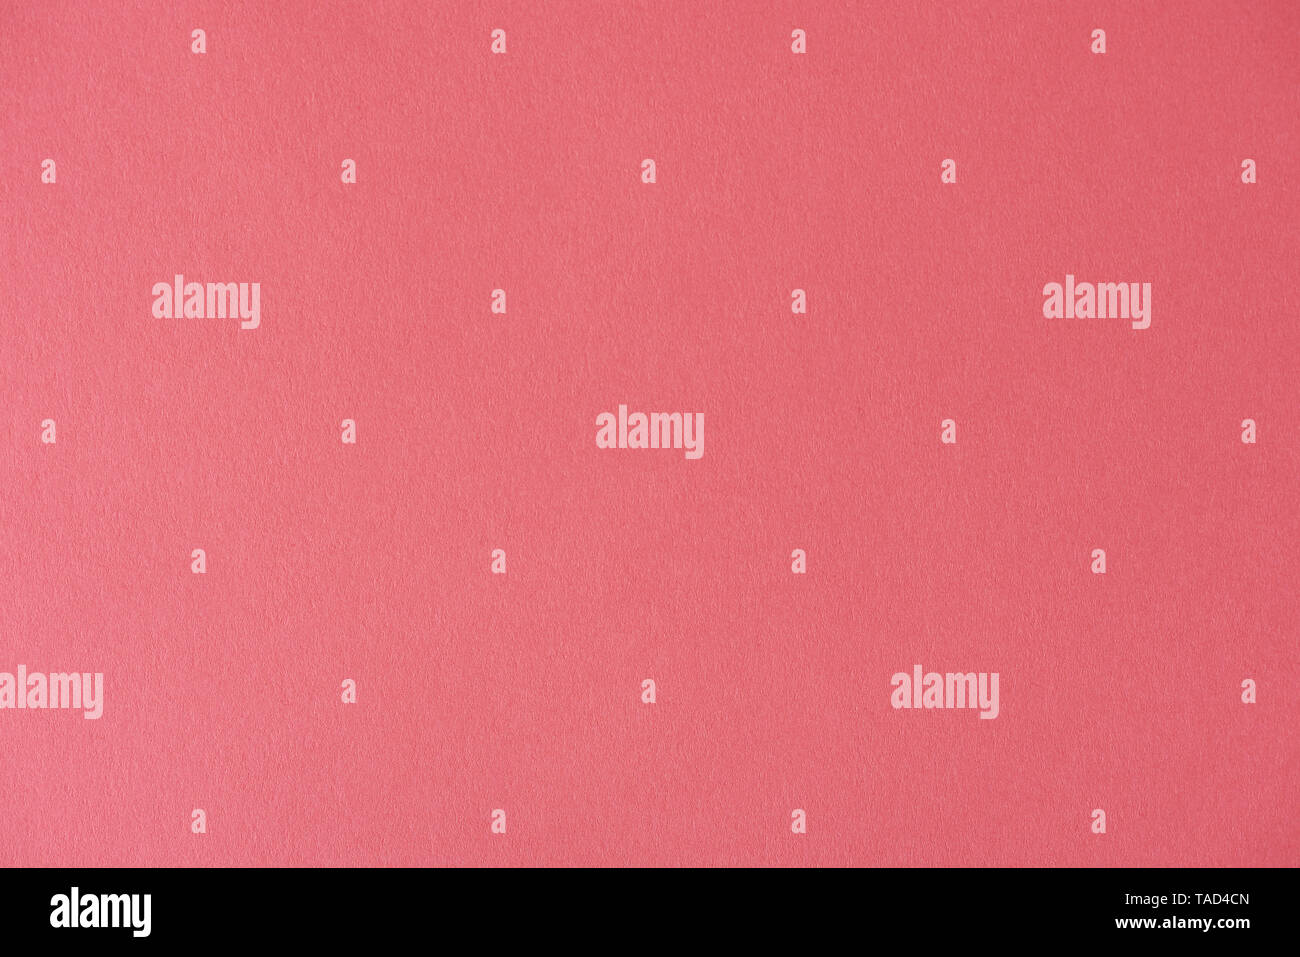 Pink paper texture background. Rose color paper pattern Stock Photo